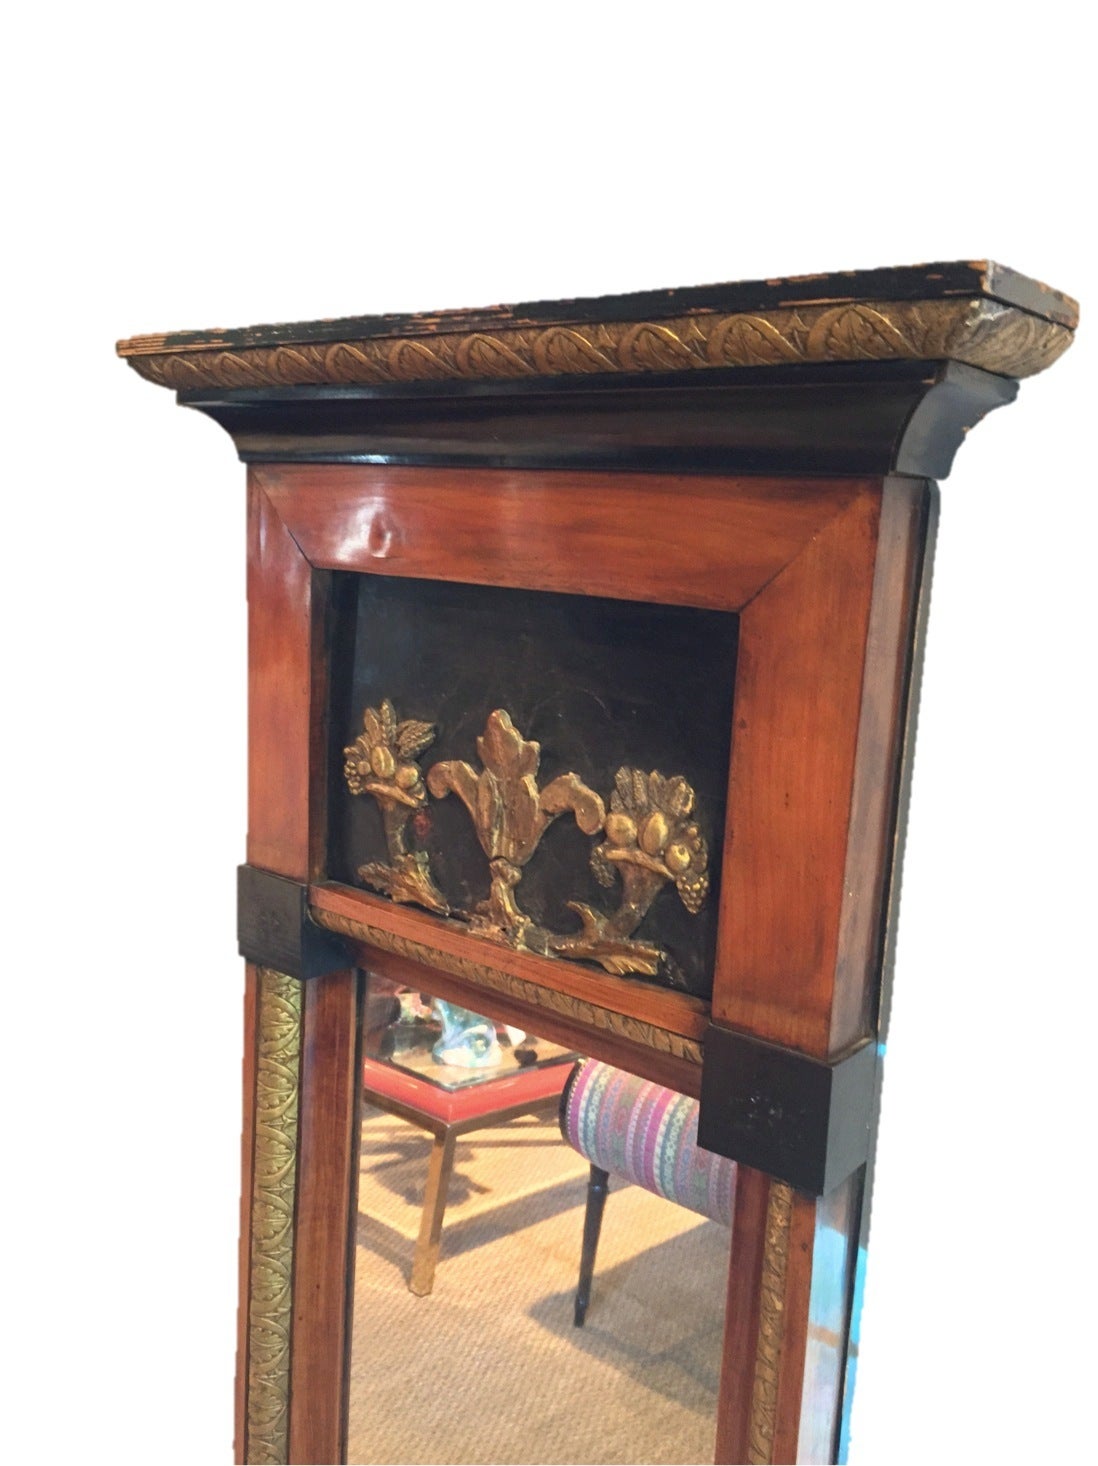 Tall and narrow walnut and ebonized wood framed mirror with gilt hand-carved detail border and cornucopia detail at top.